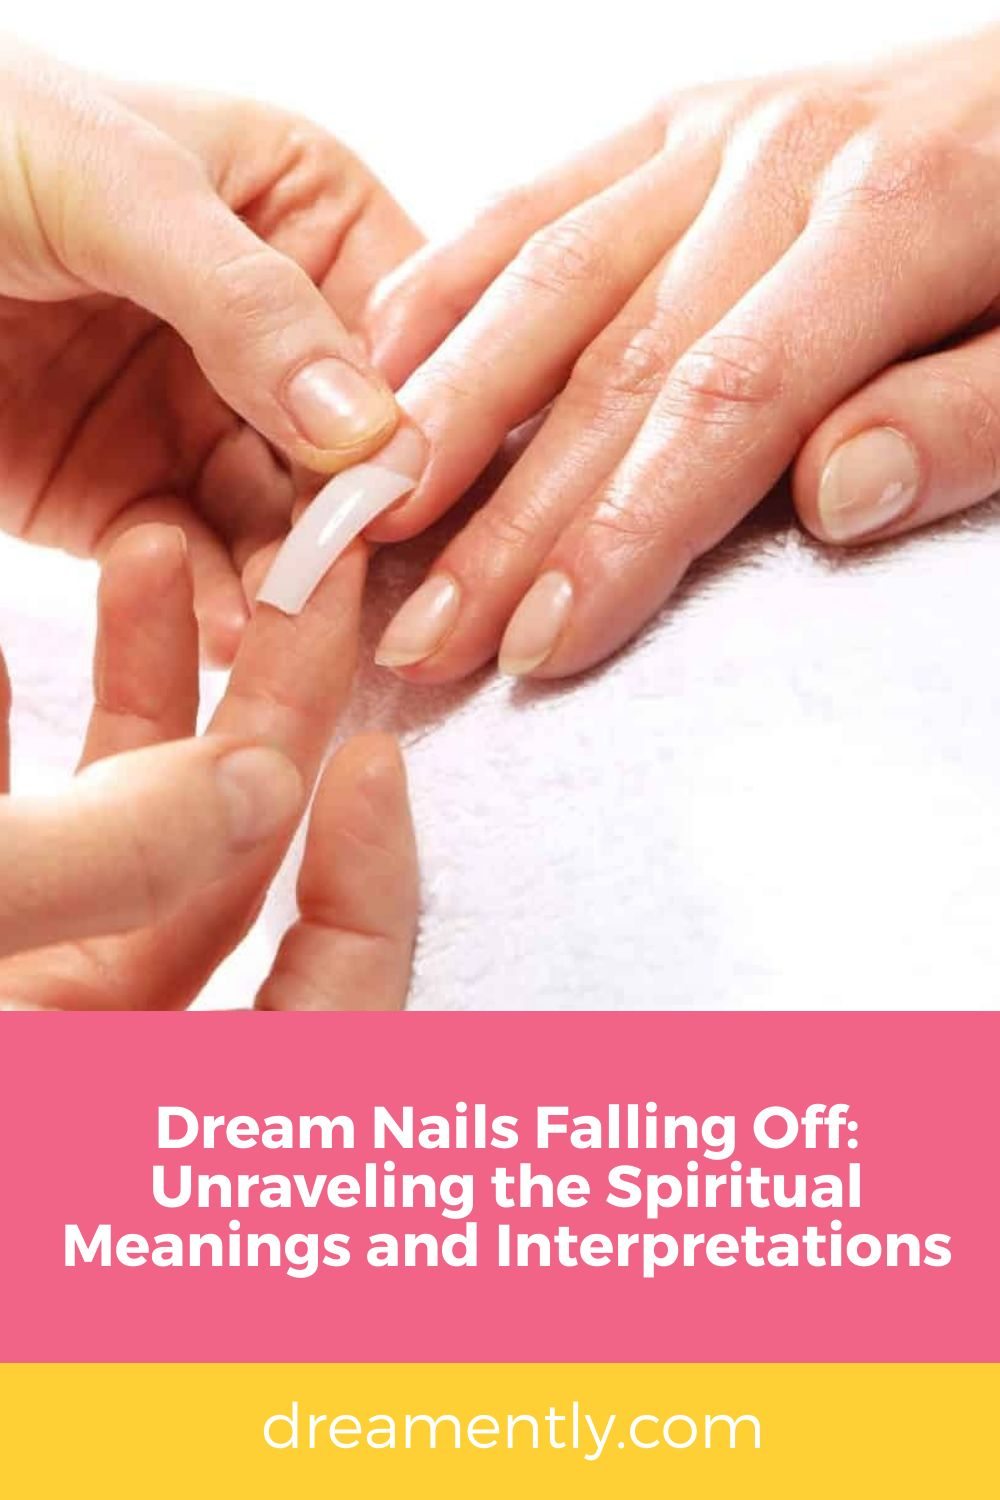 Dream Nails Falling Off Unraveling the Spiritual Meanings and Interpretations